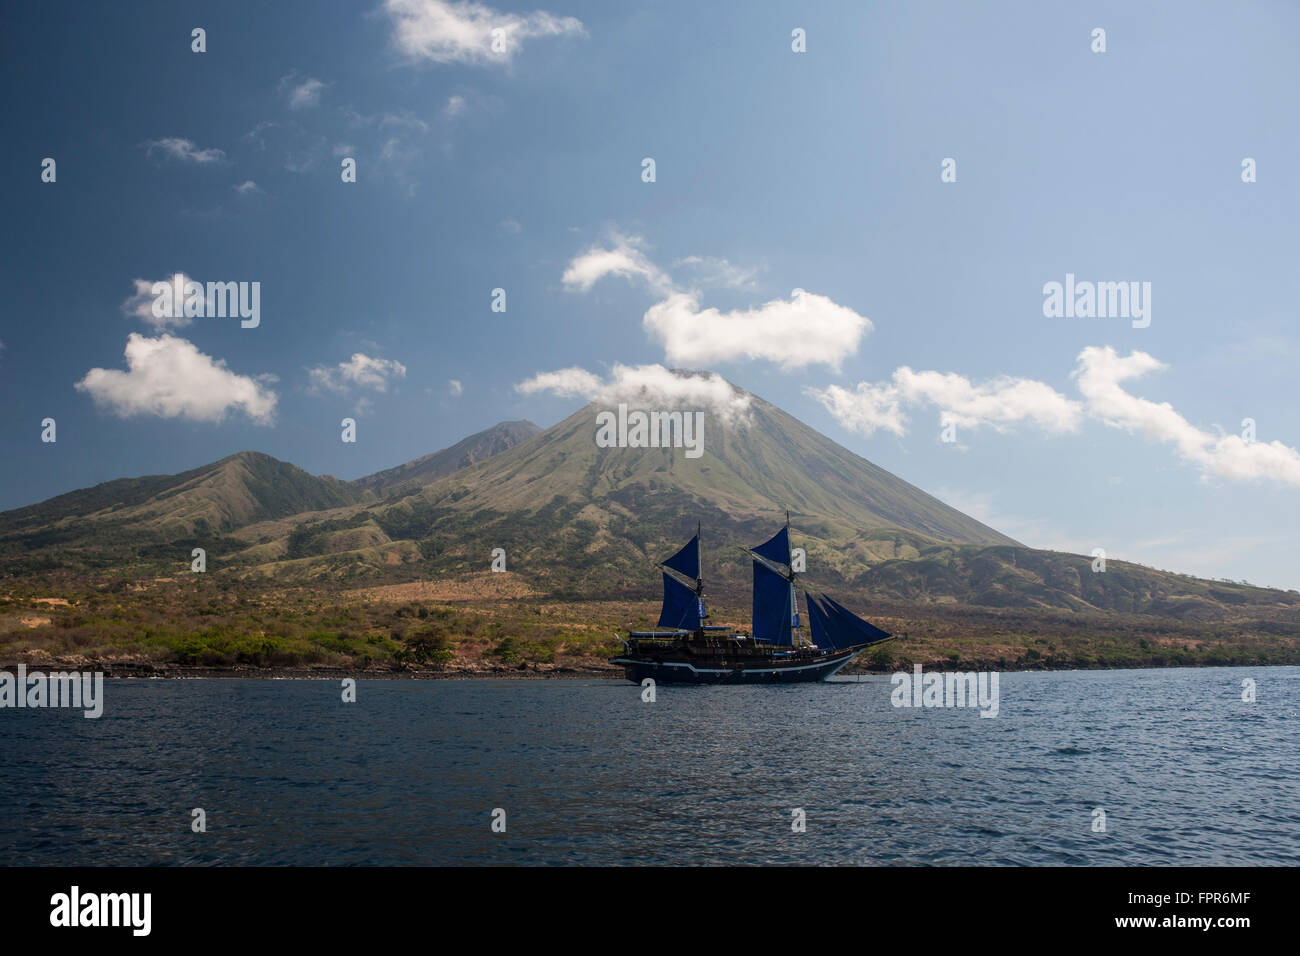 An Indonesian pinisi schooner sails near Pulau Sangeang, a remote volcanic island near Komodo in Indonesia. Stock Photo